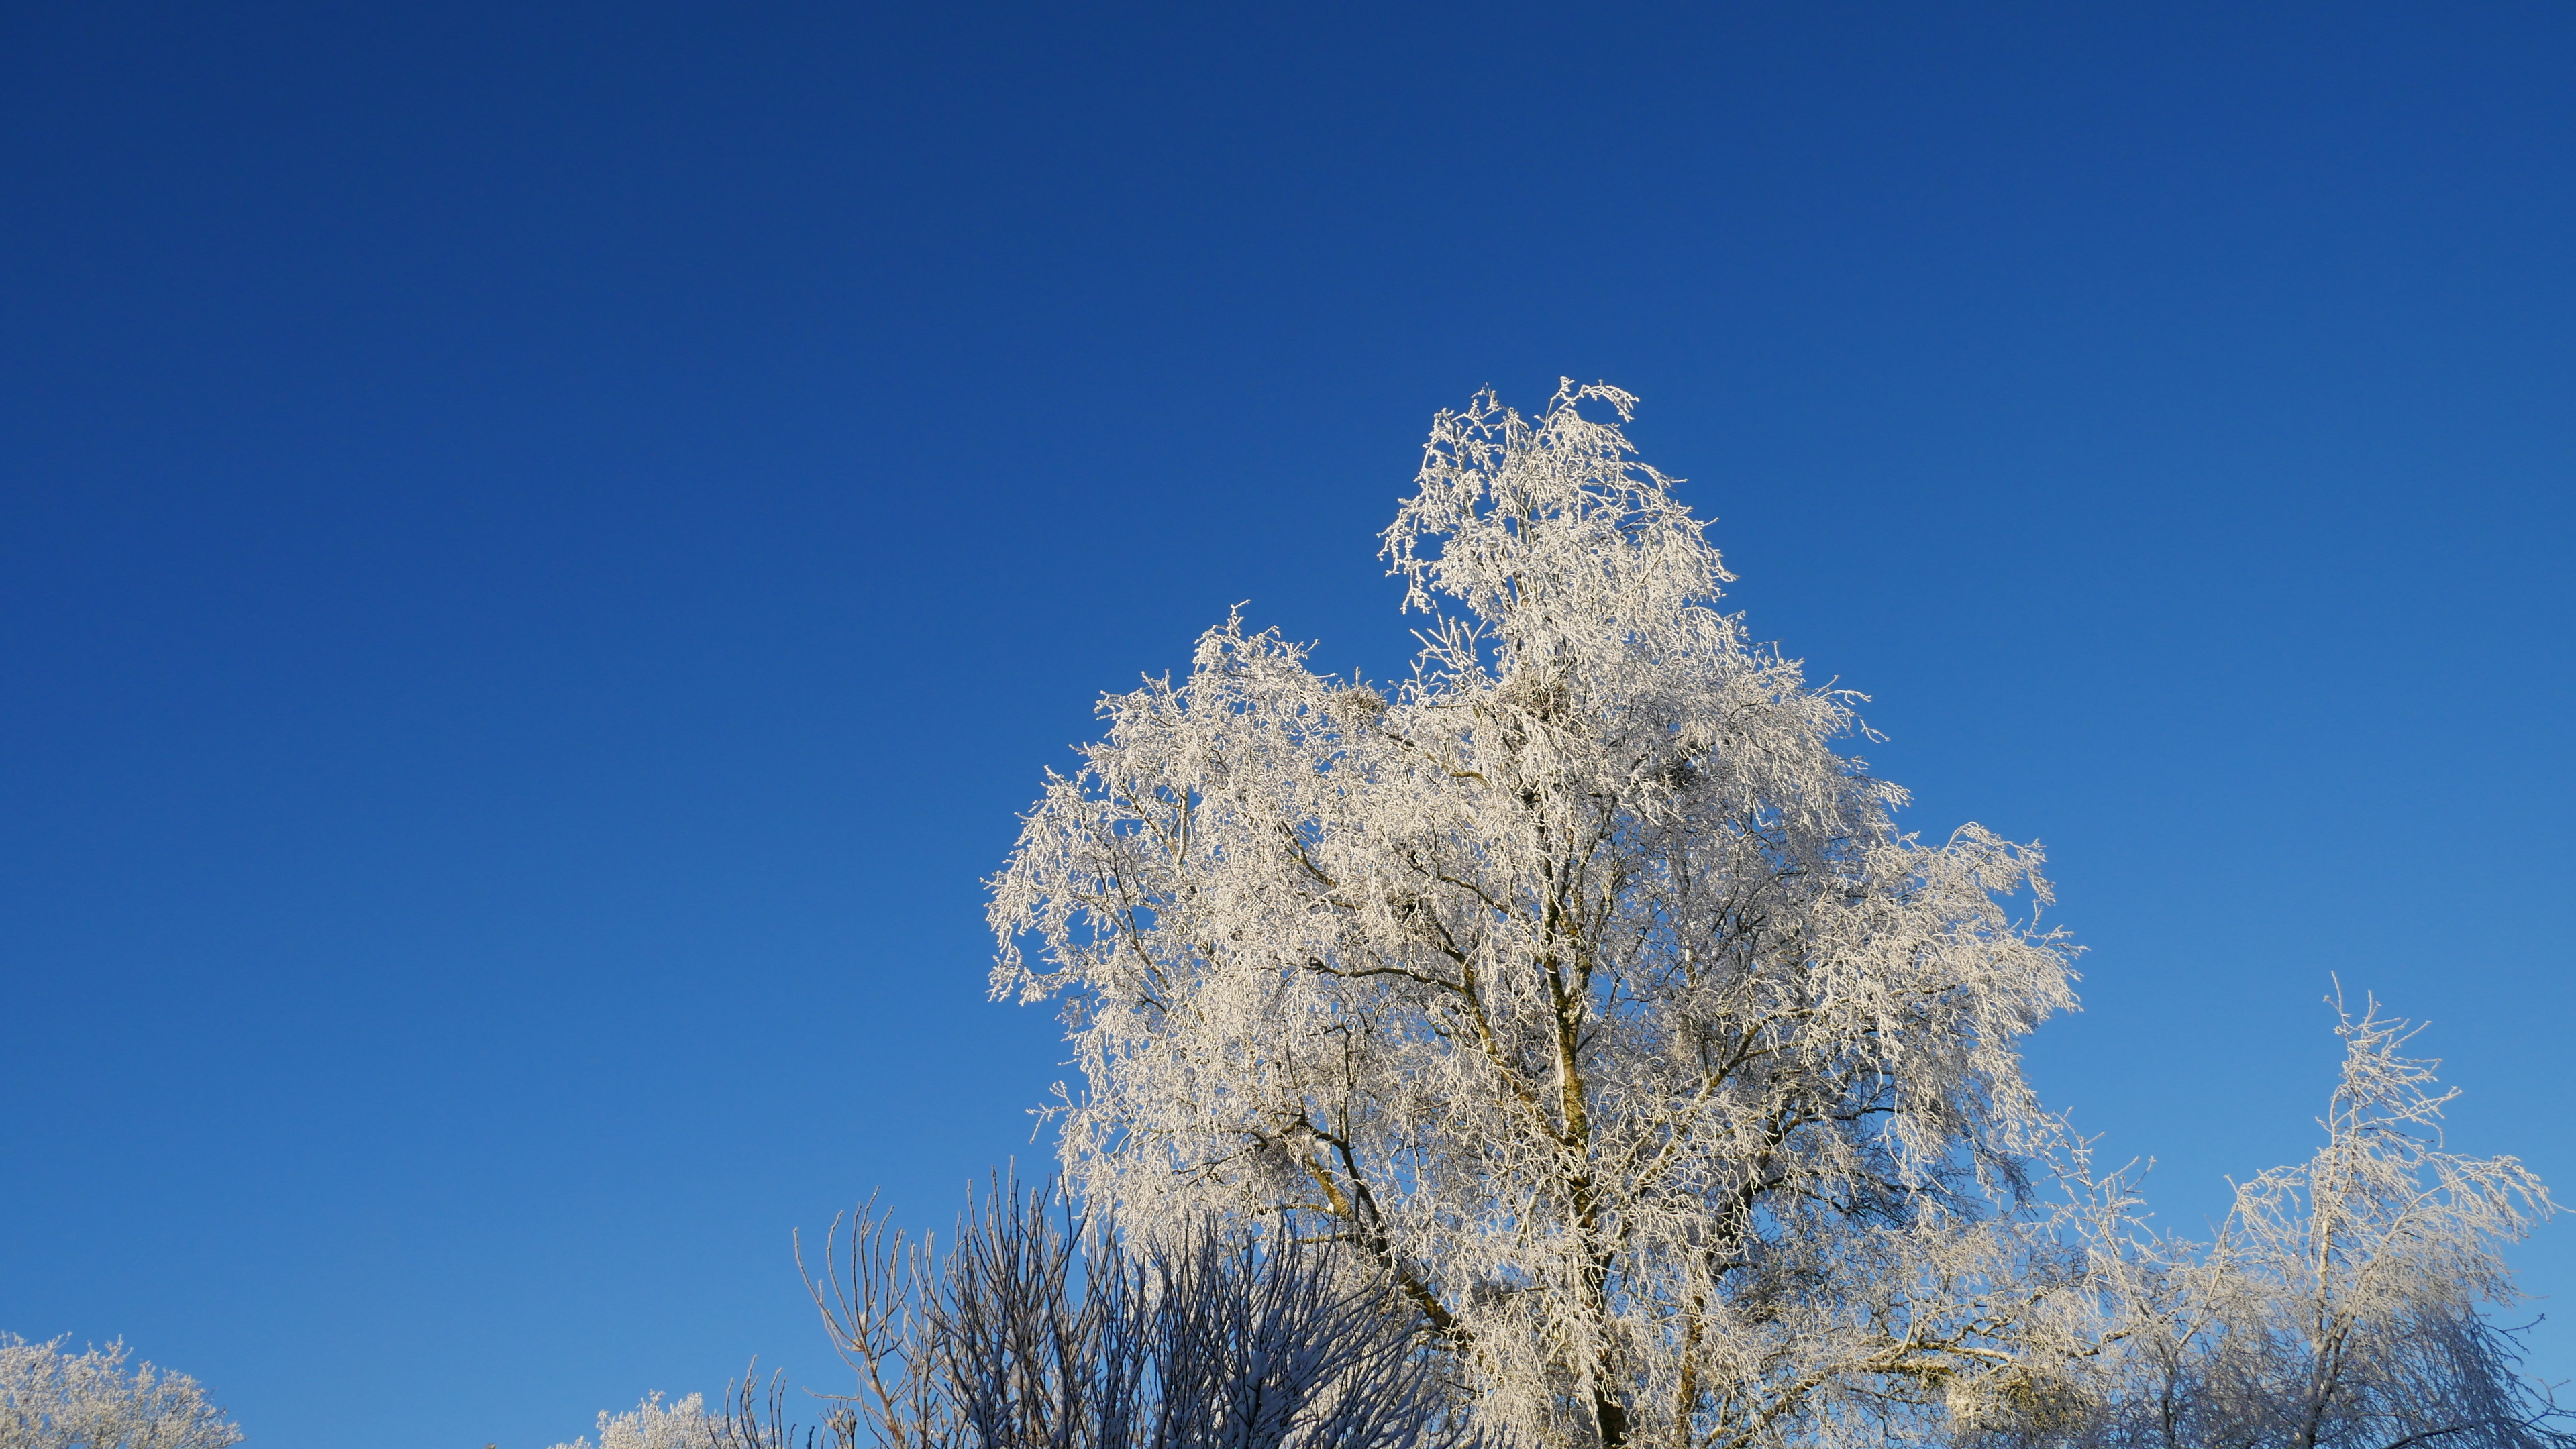 radiant blue sky with a birch tree covered in snow in foreground